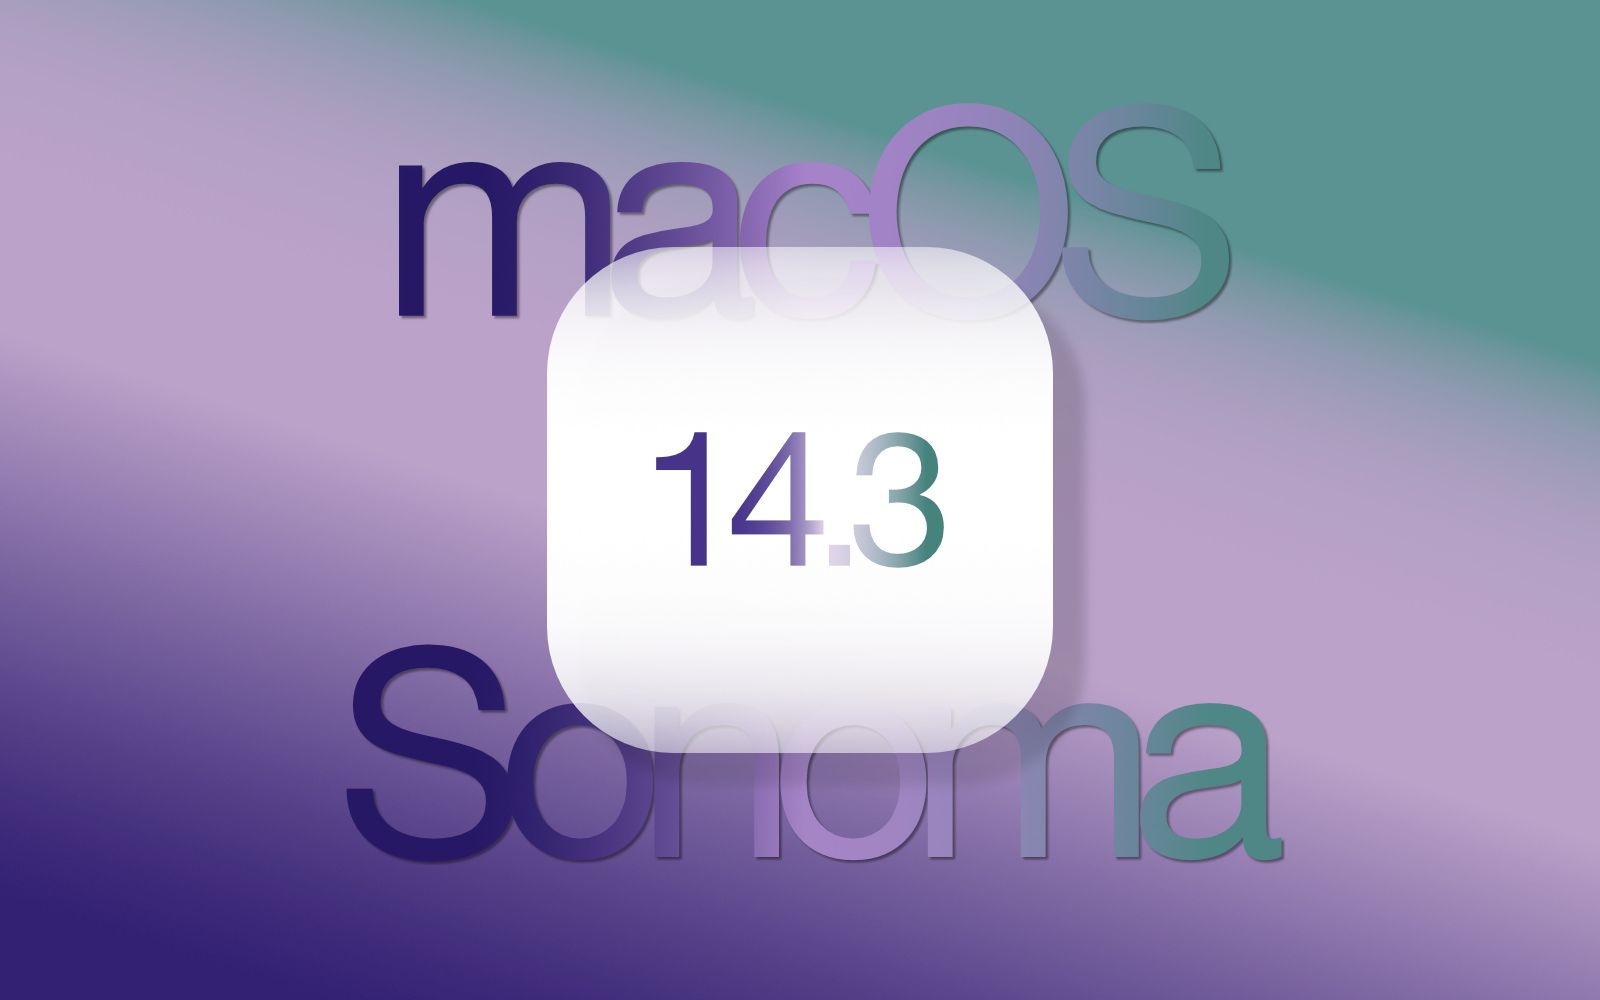 Macos Sonoma 14 3 official release